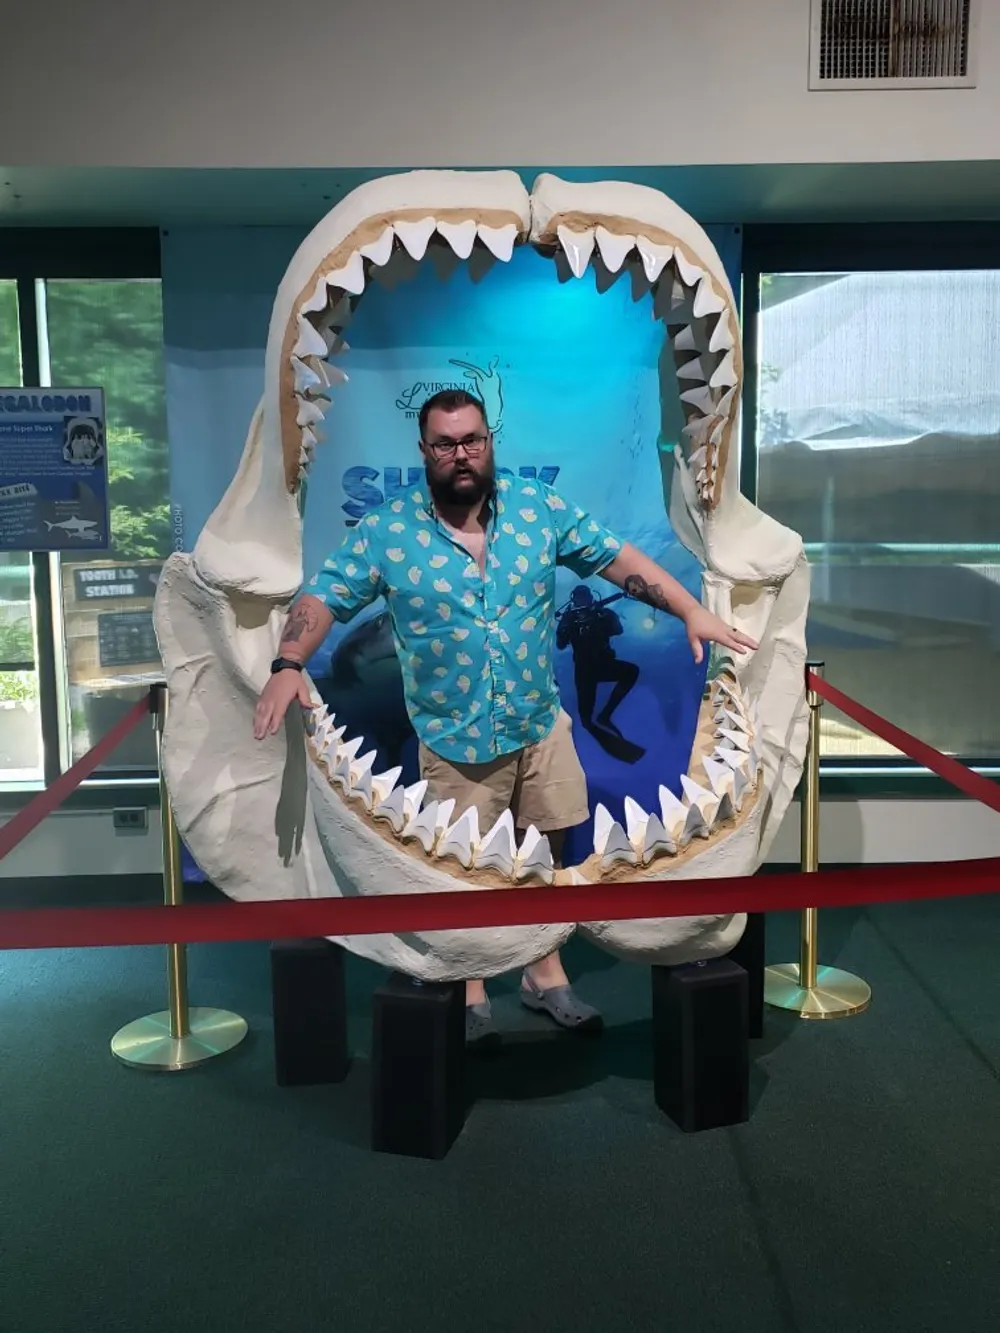 A person is standing in the open mouth of a large shark exhibit posing for a photo